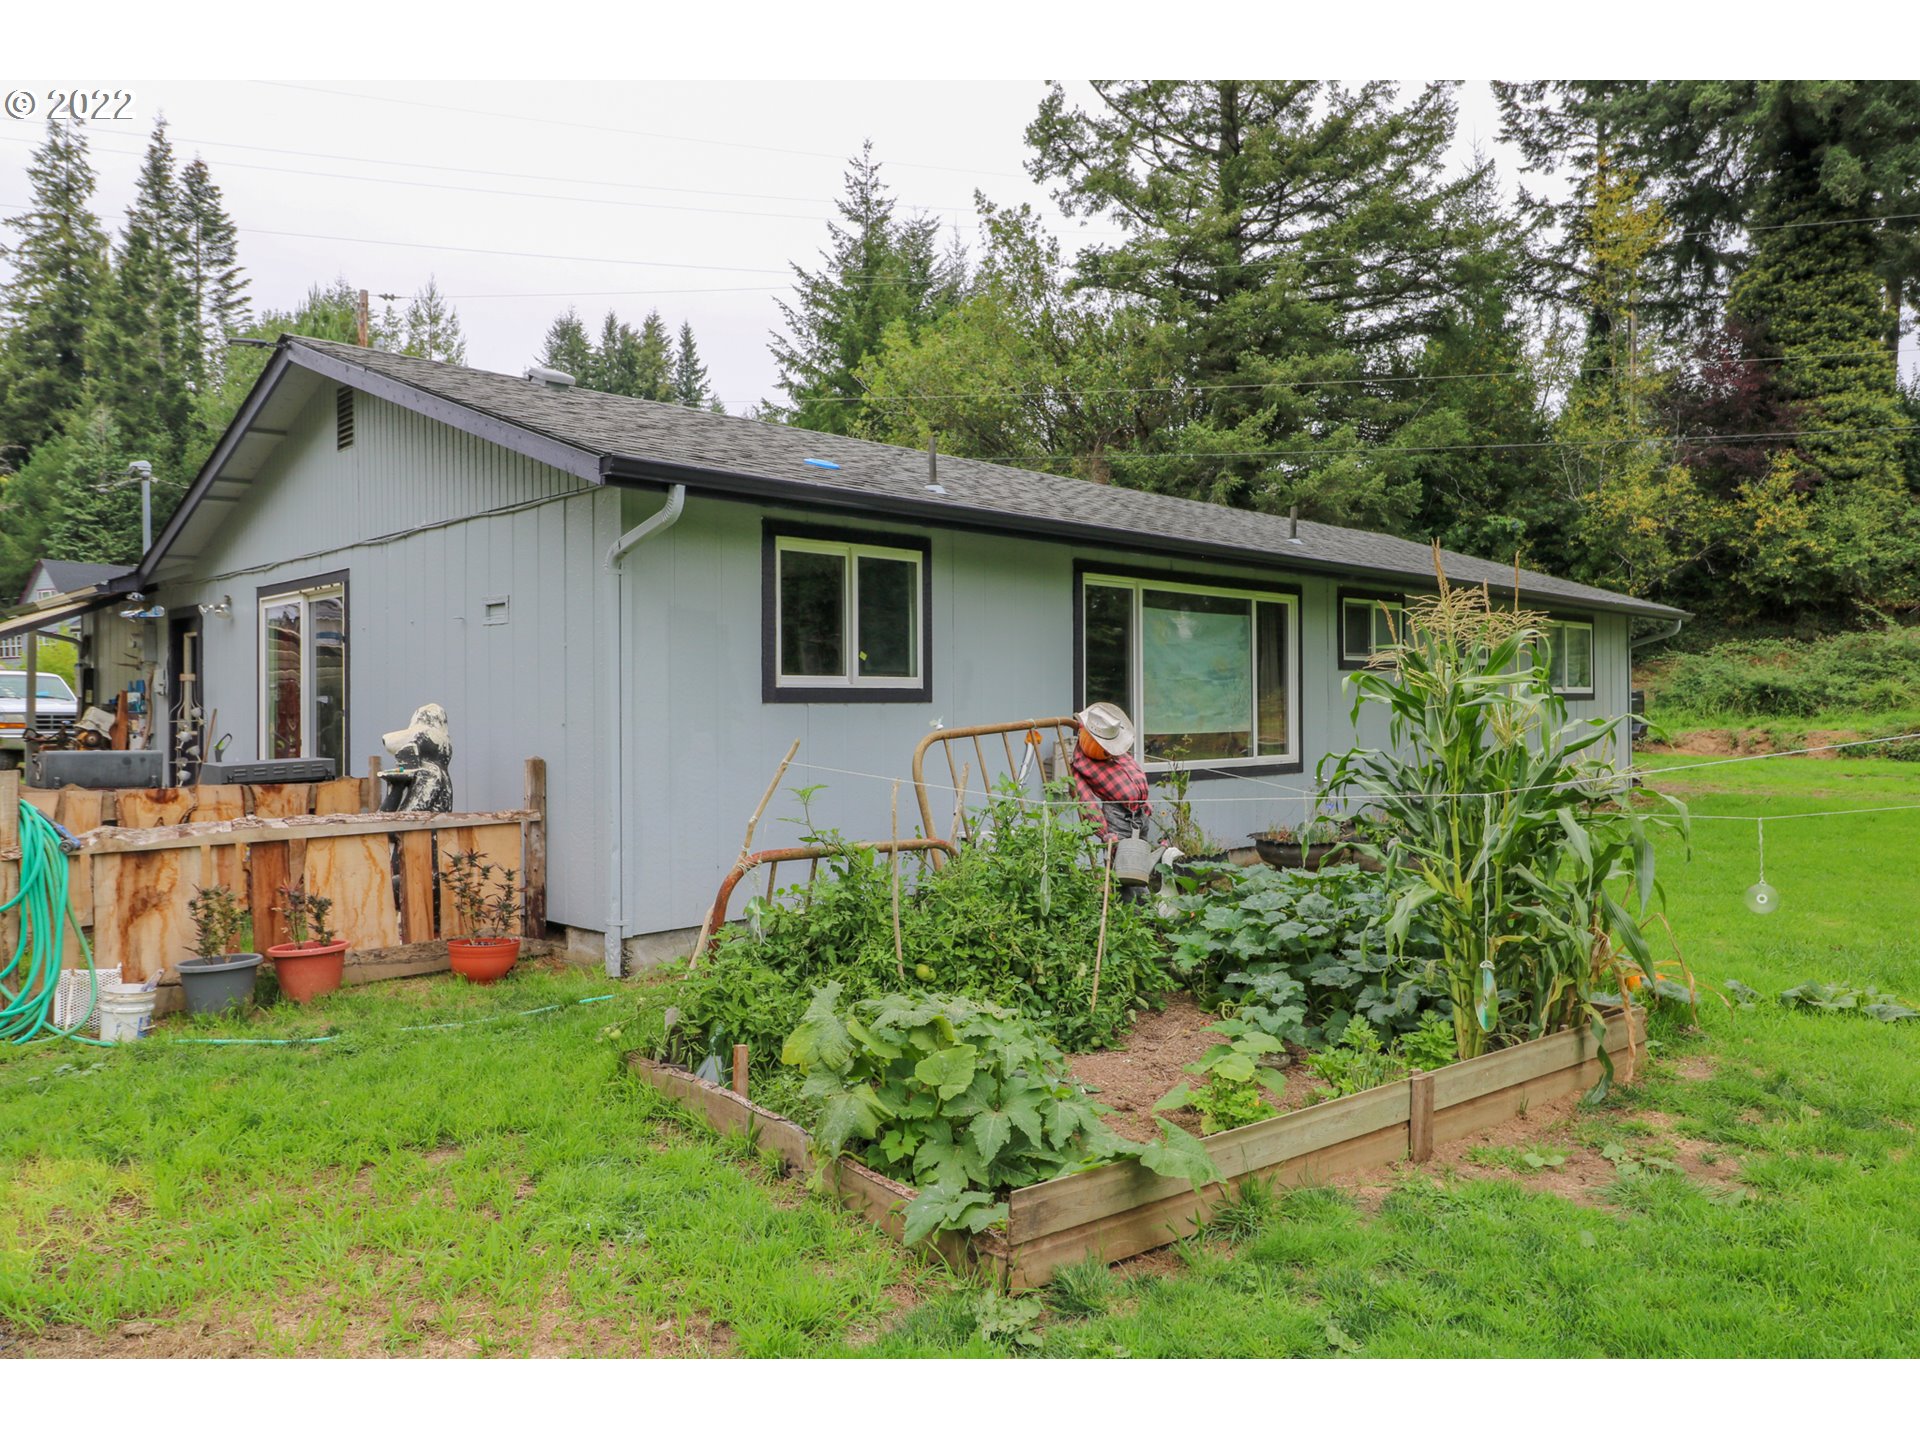 1485 N IVY ST, Coquille, OR 97423